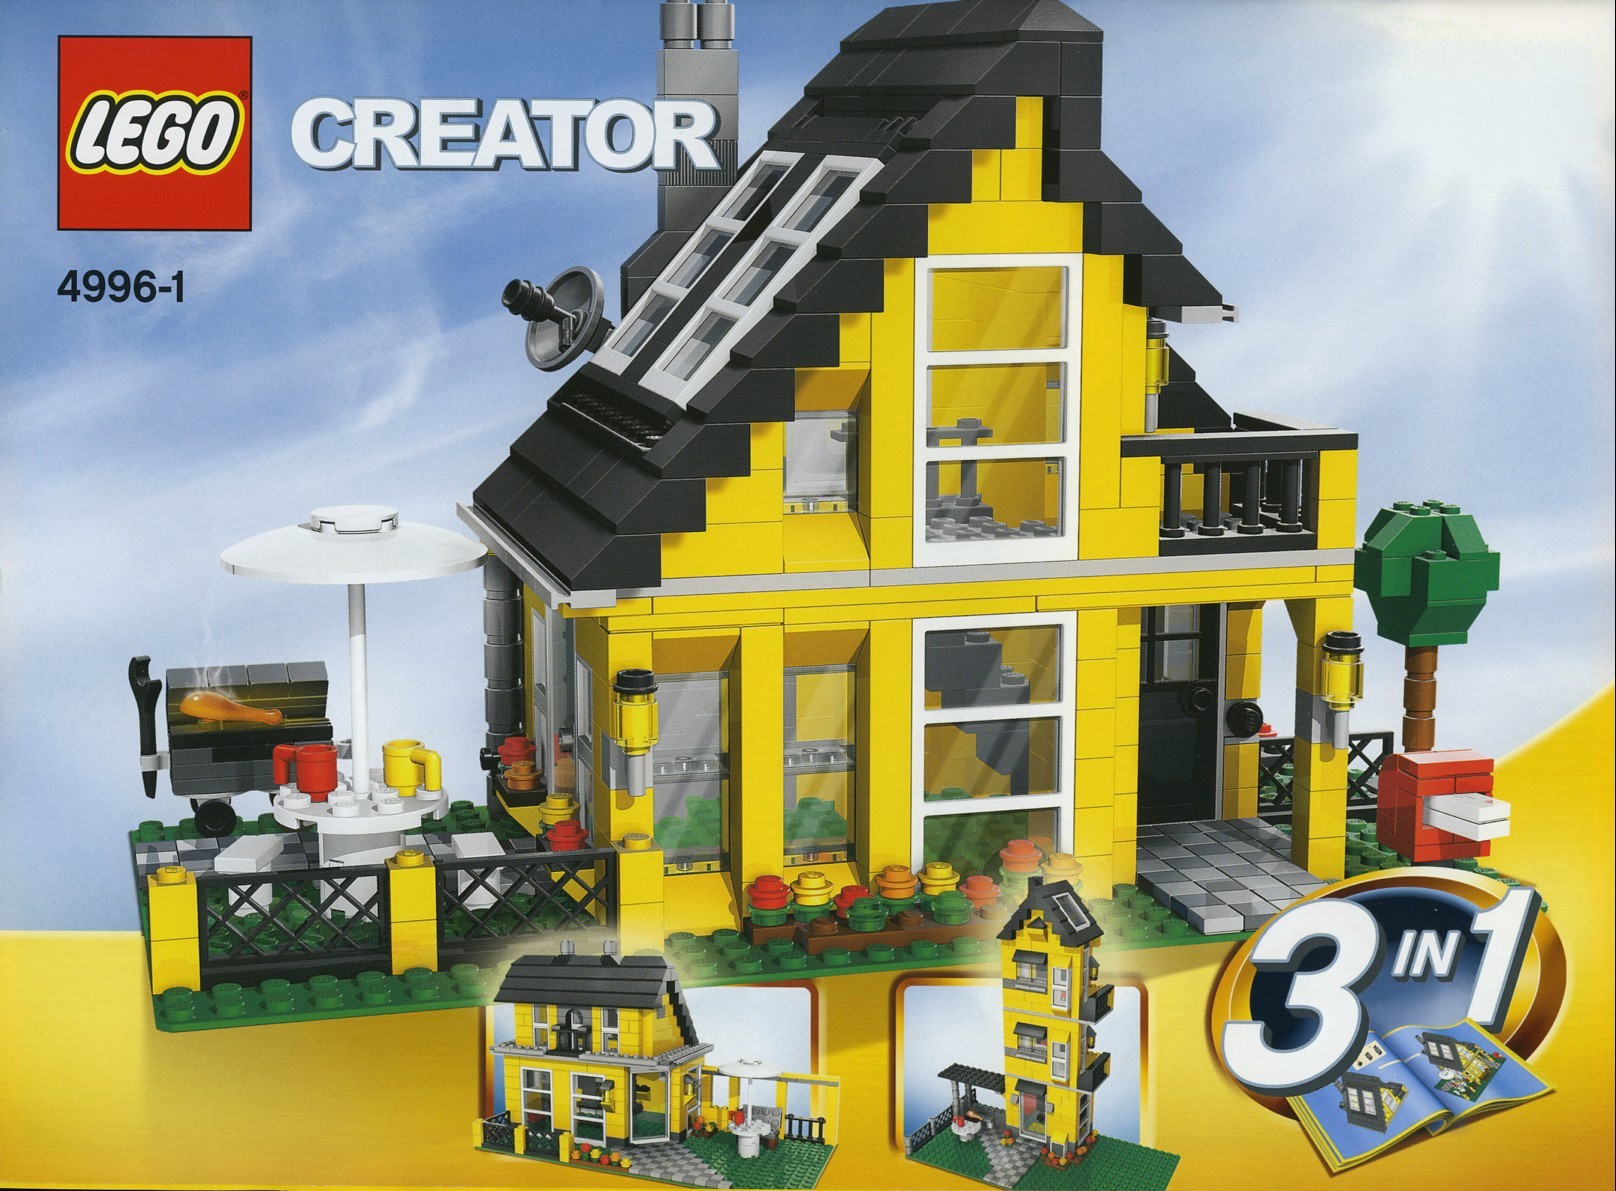 What are your thoughts on the “mini modular” Creator 3-1 sets? : r/lego